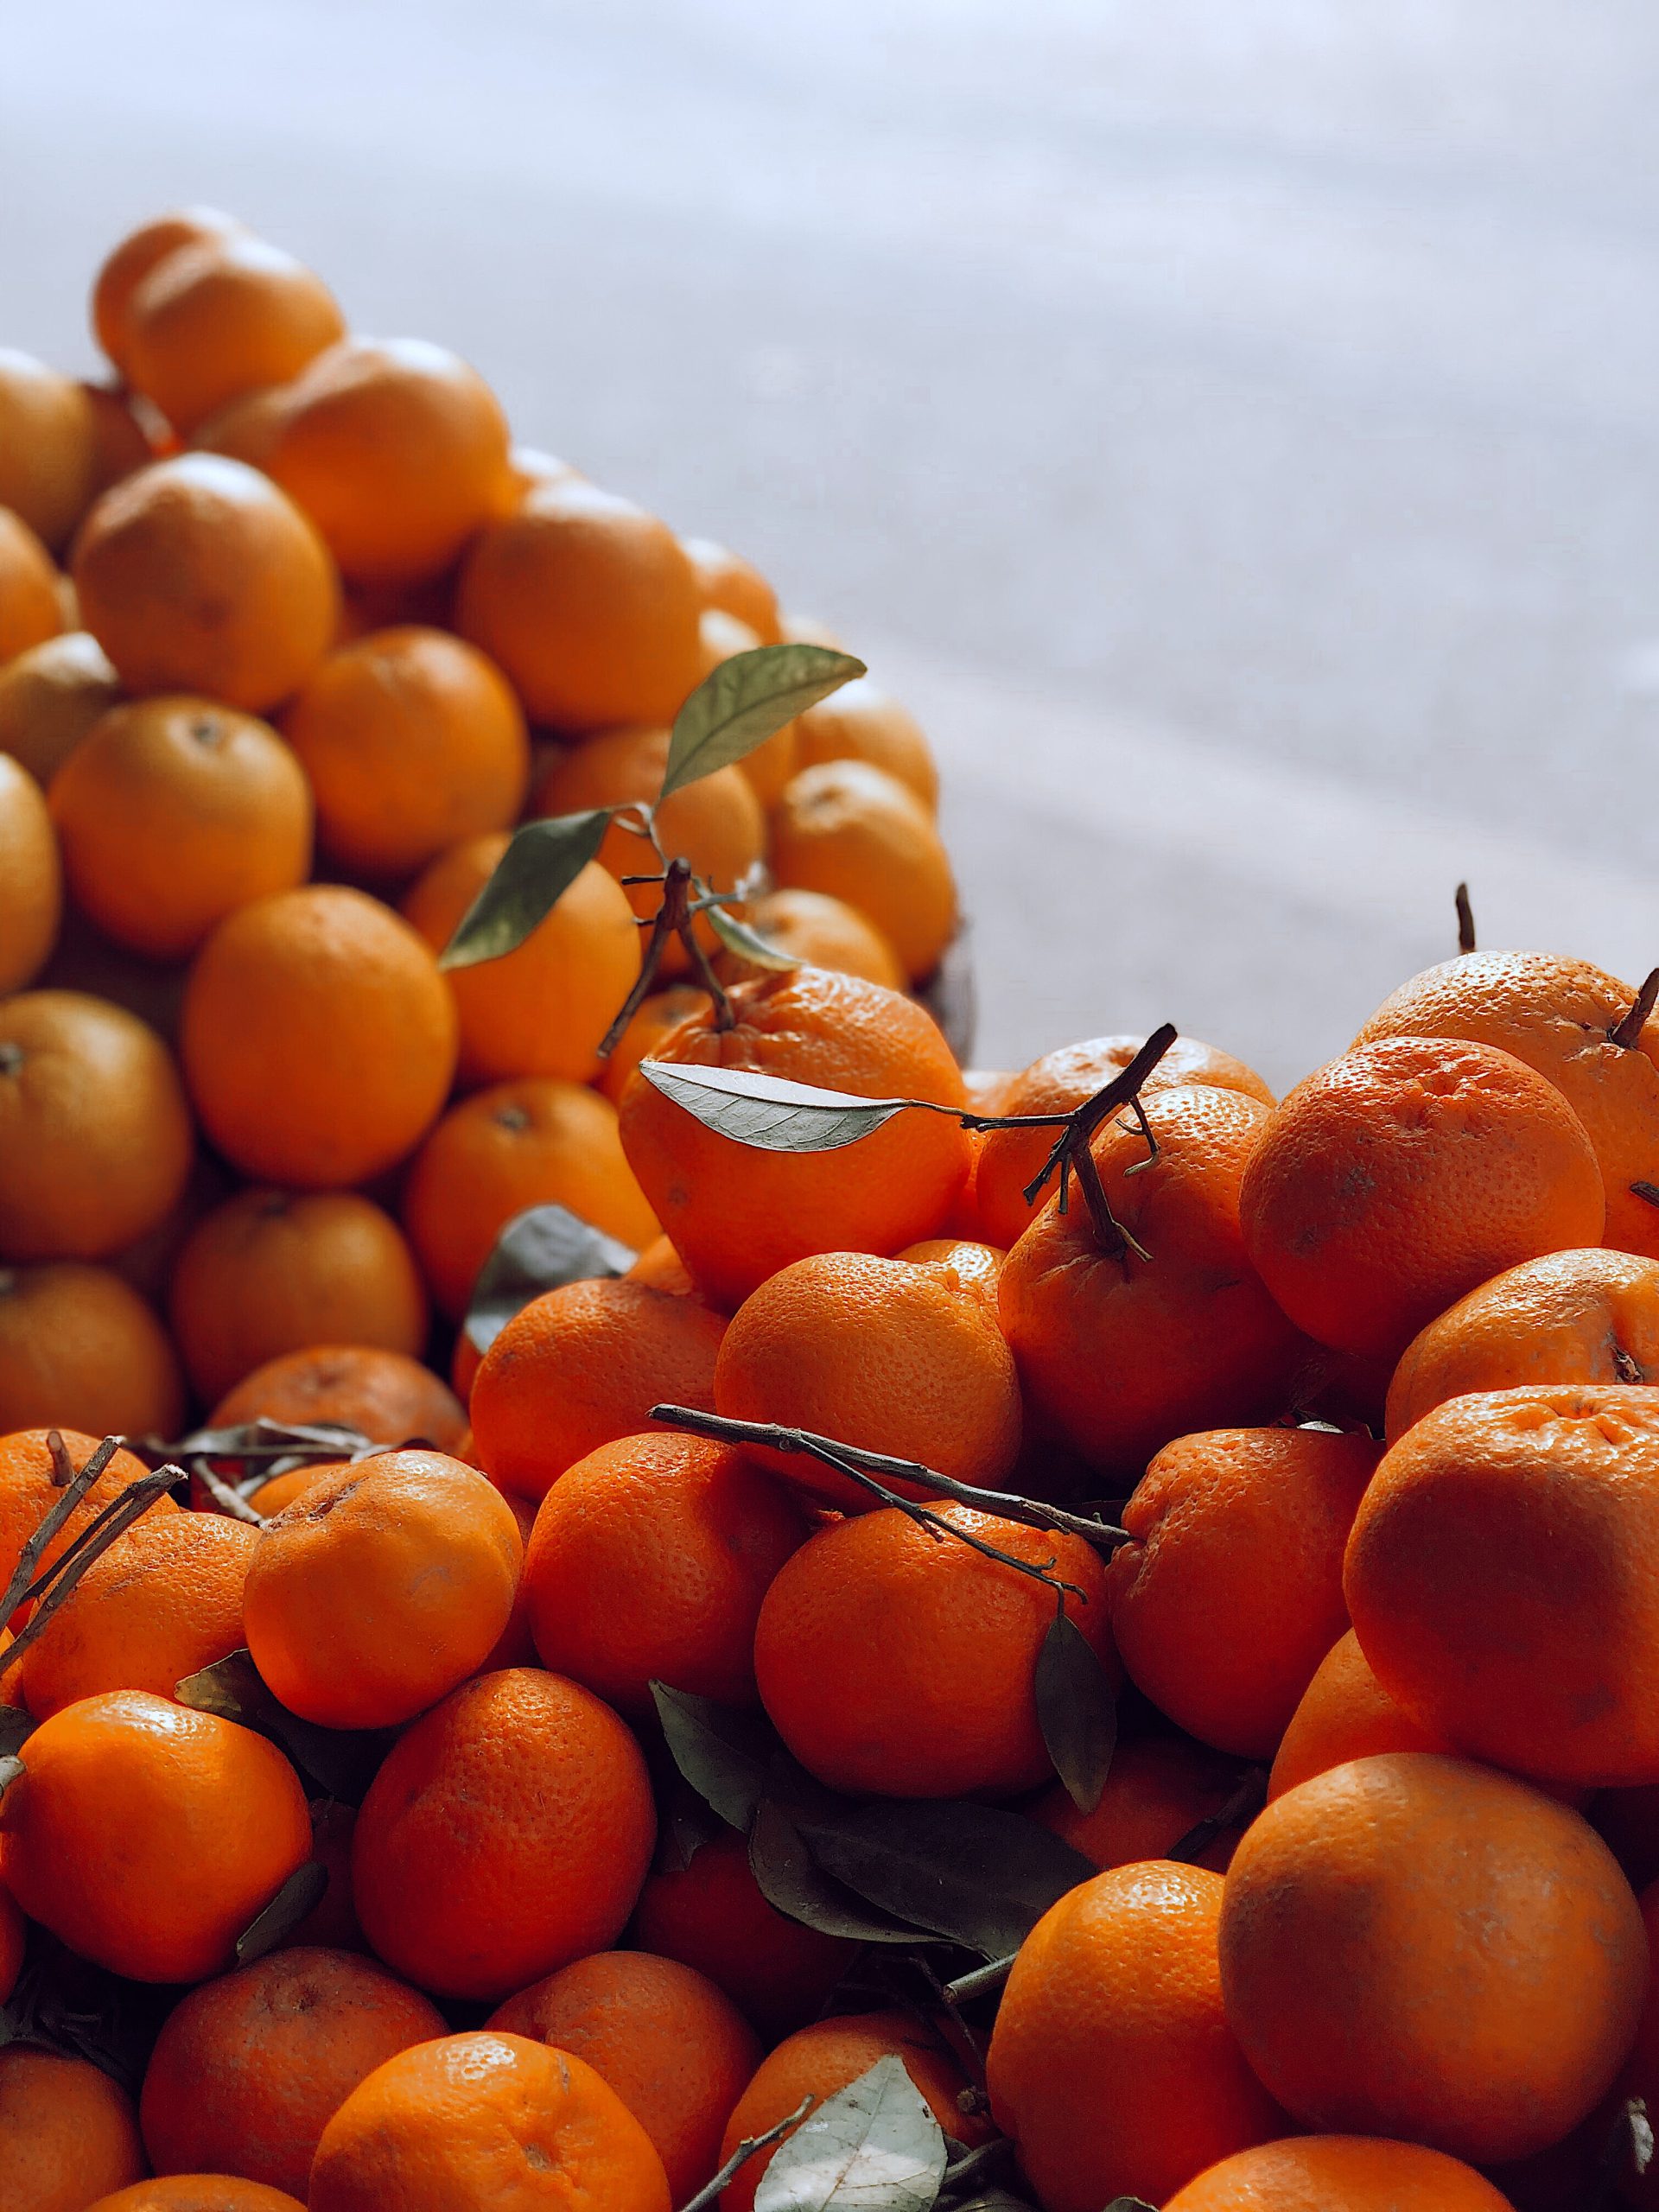 photo of many oranges with stems